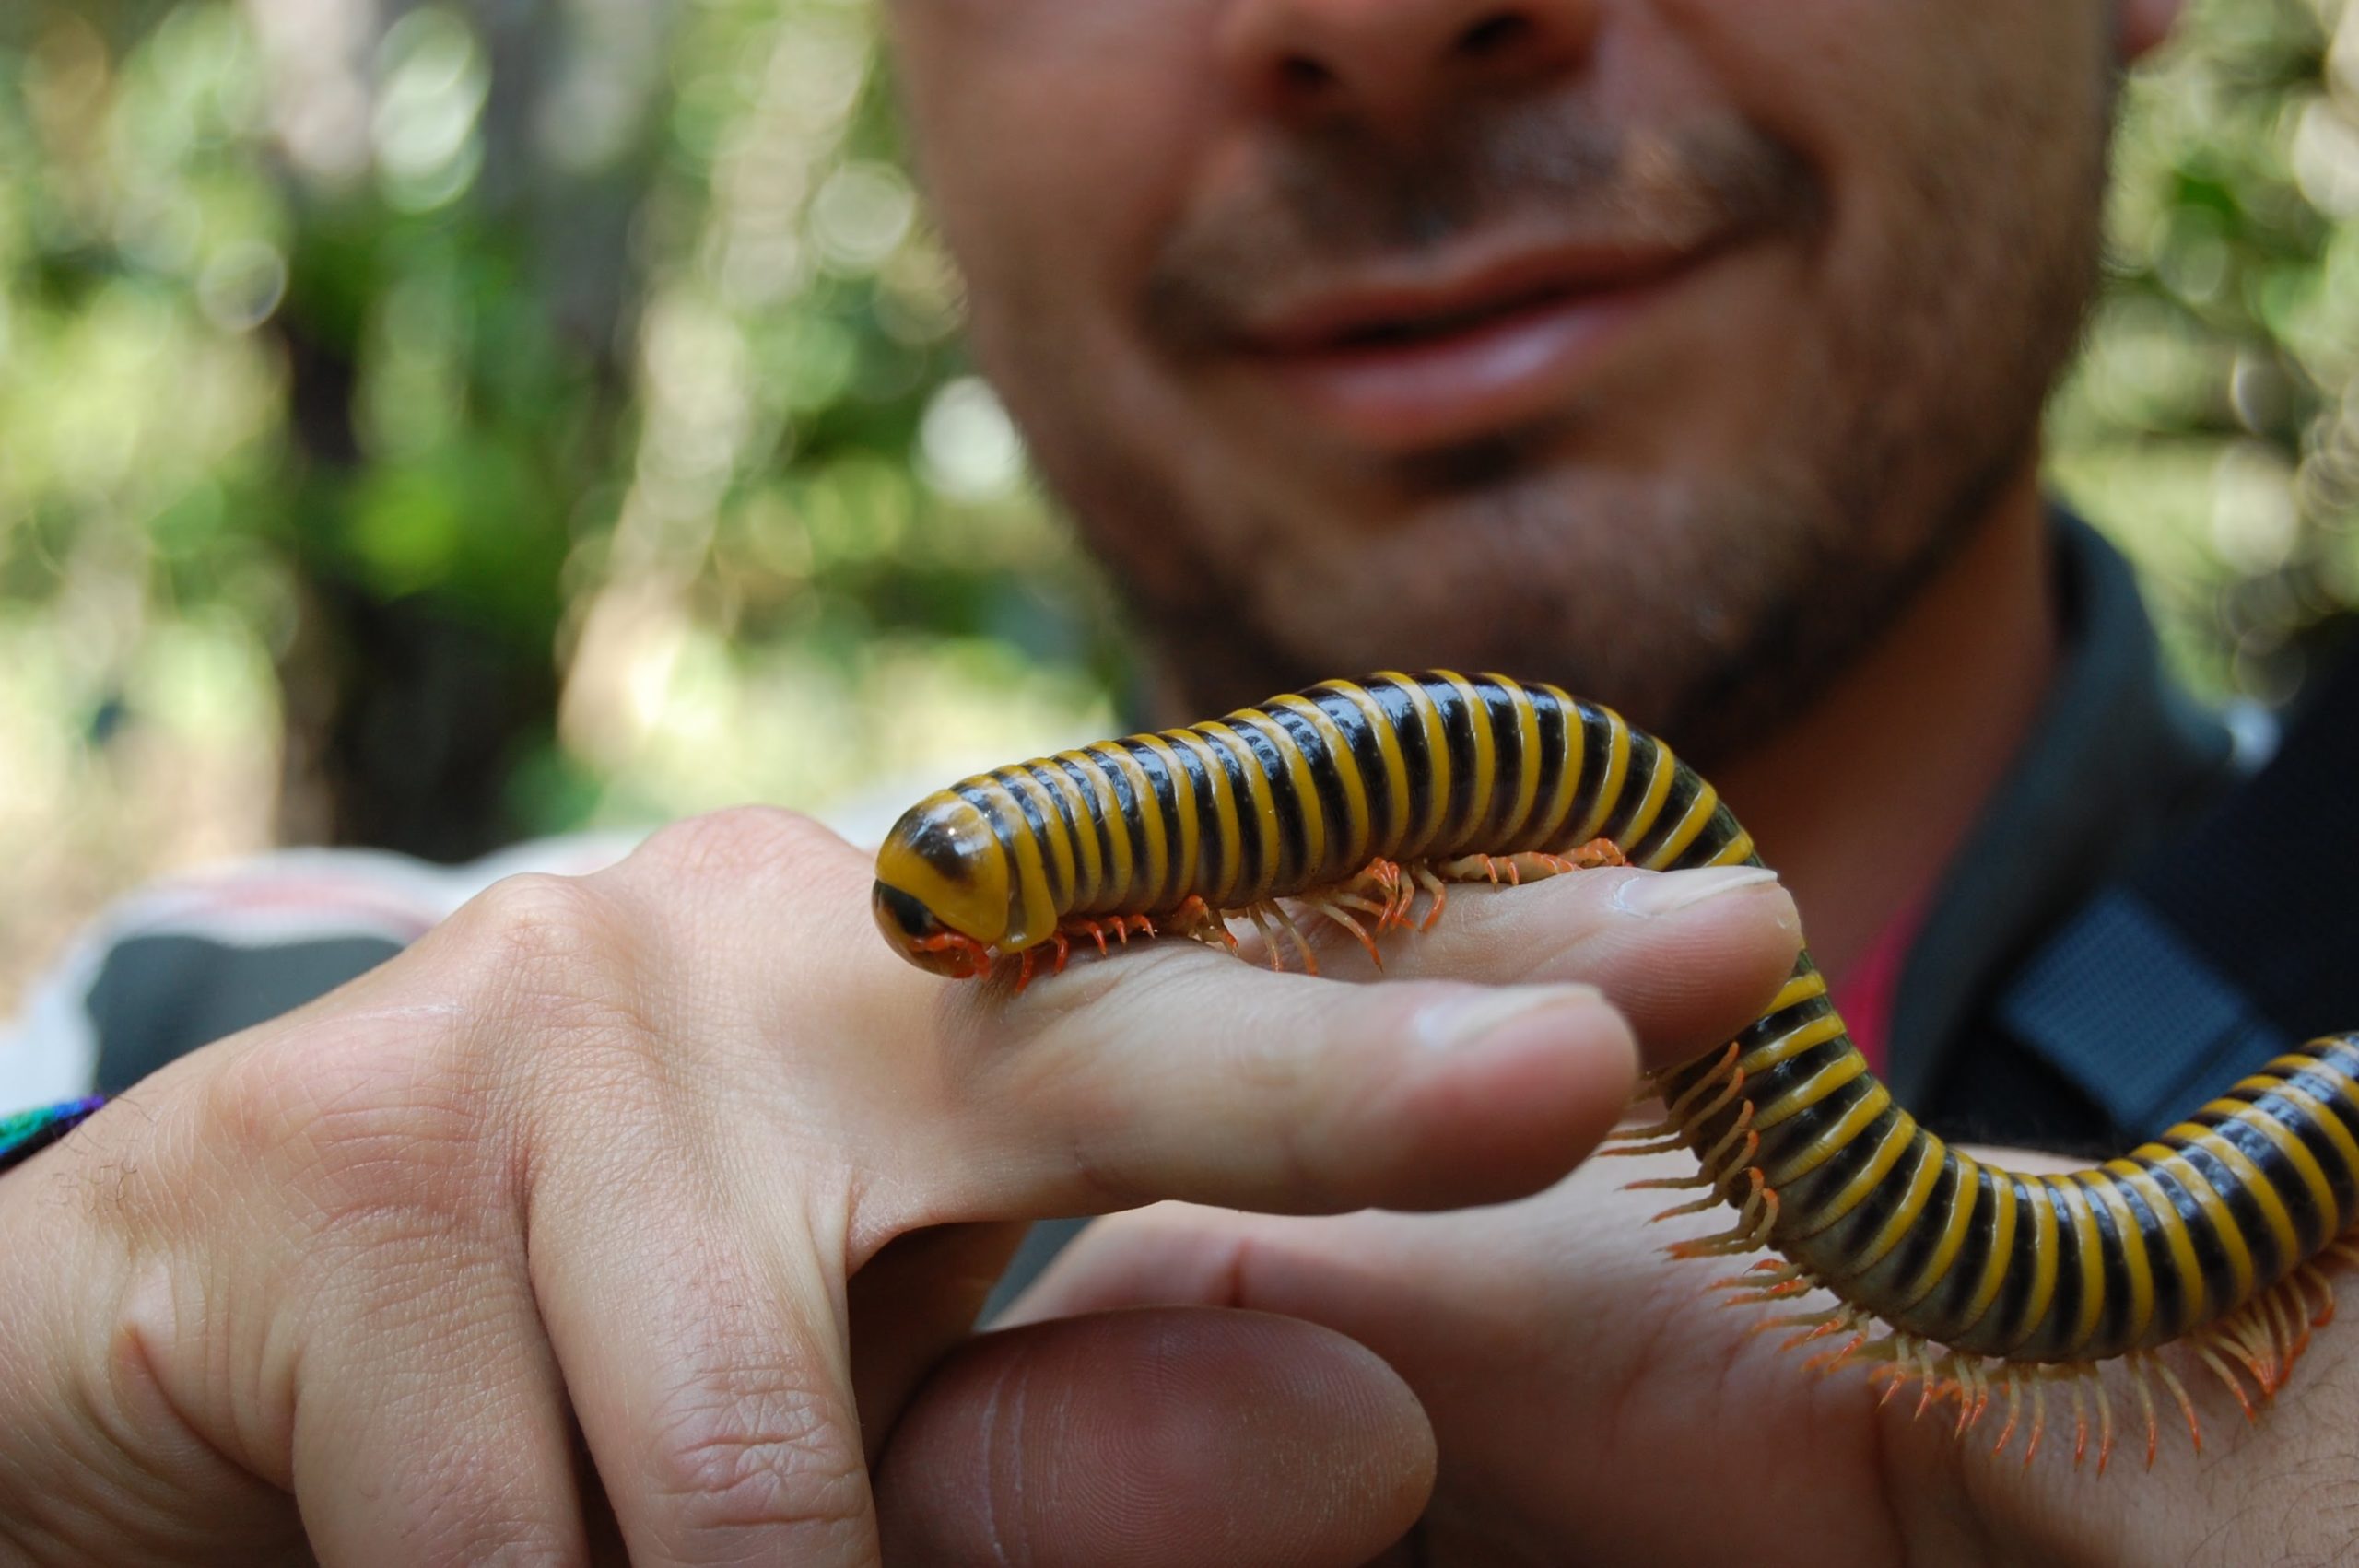 750 legs and stinky: The miniature lives of millipedes – CSIROscope